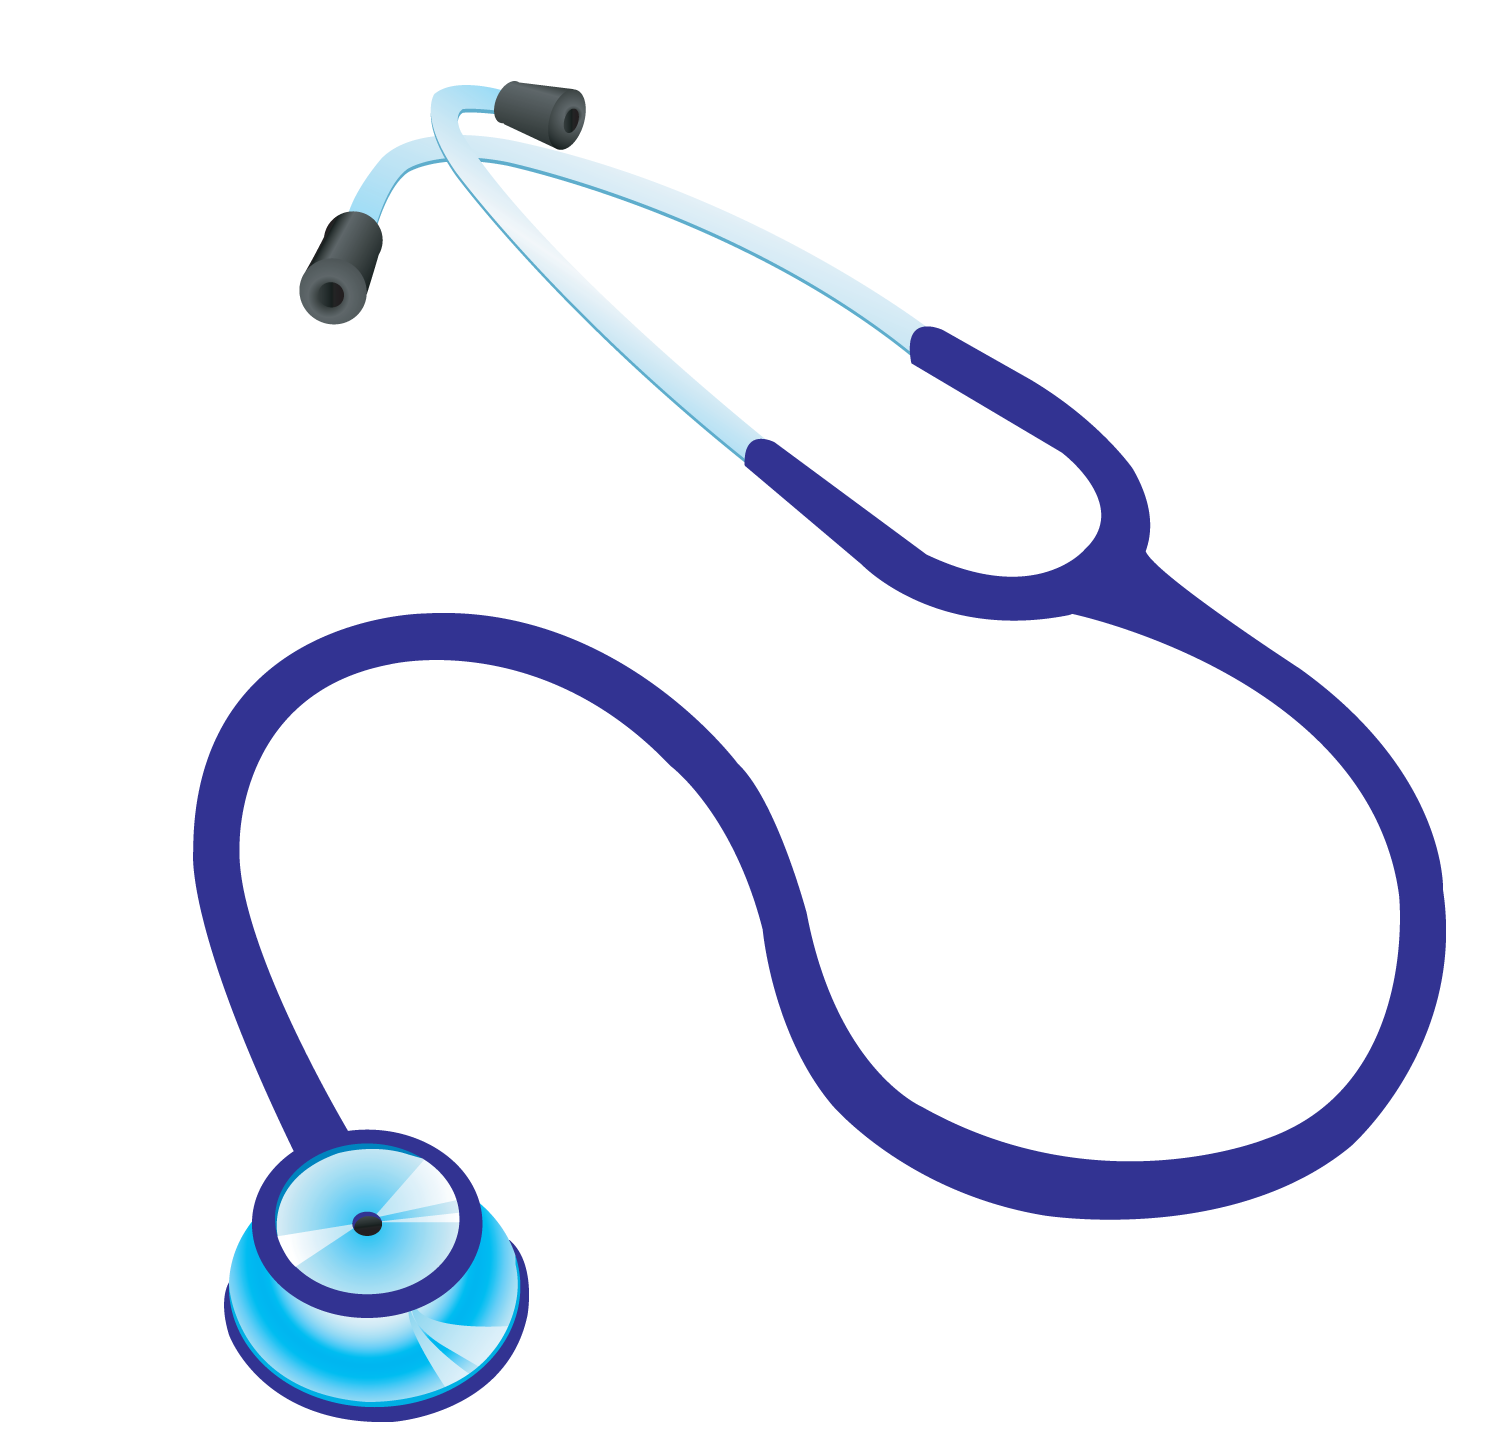 Stethoscope Png Transparent Image Download Size 1501x1441px